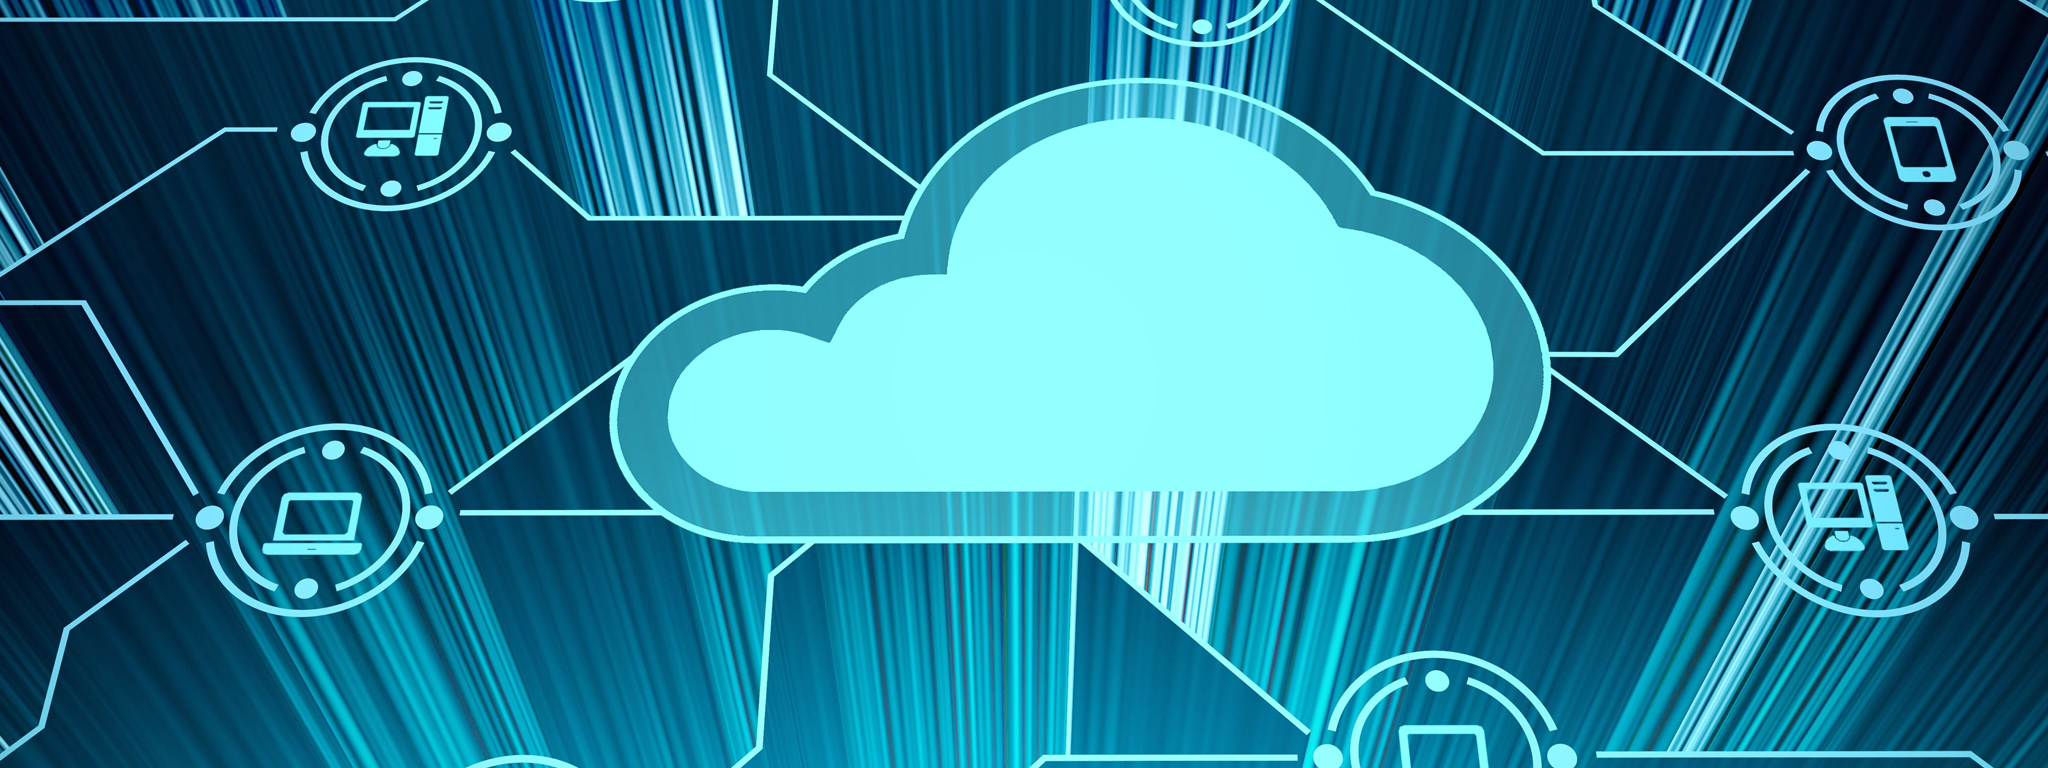 Computer-generated cloud graphic surrounded by device icons to represent desktop, laptop and mobile devices